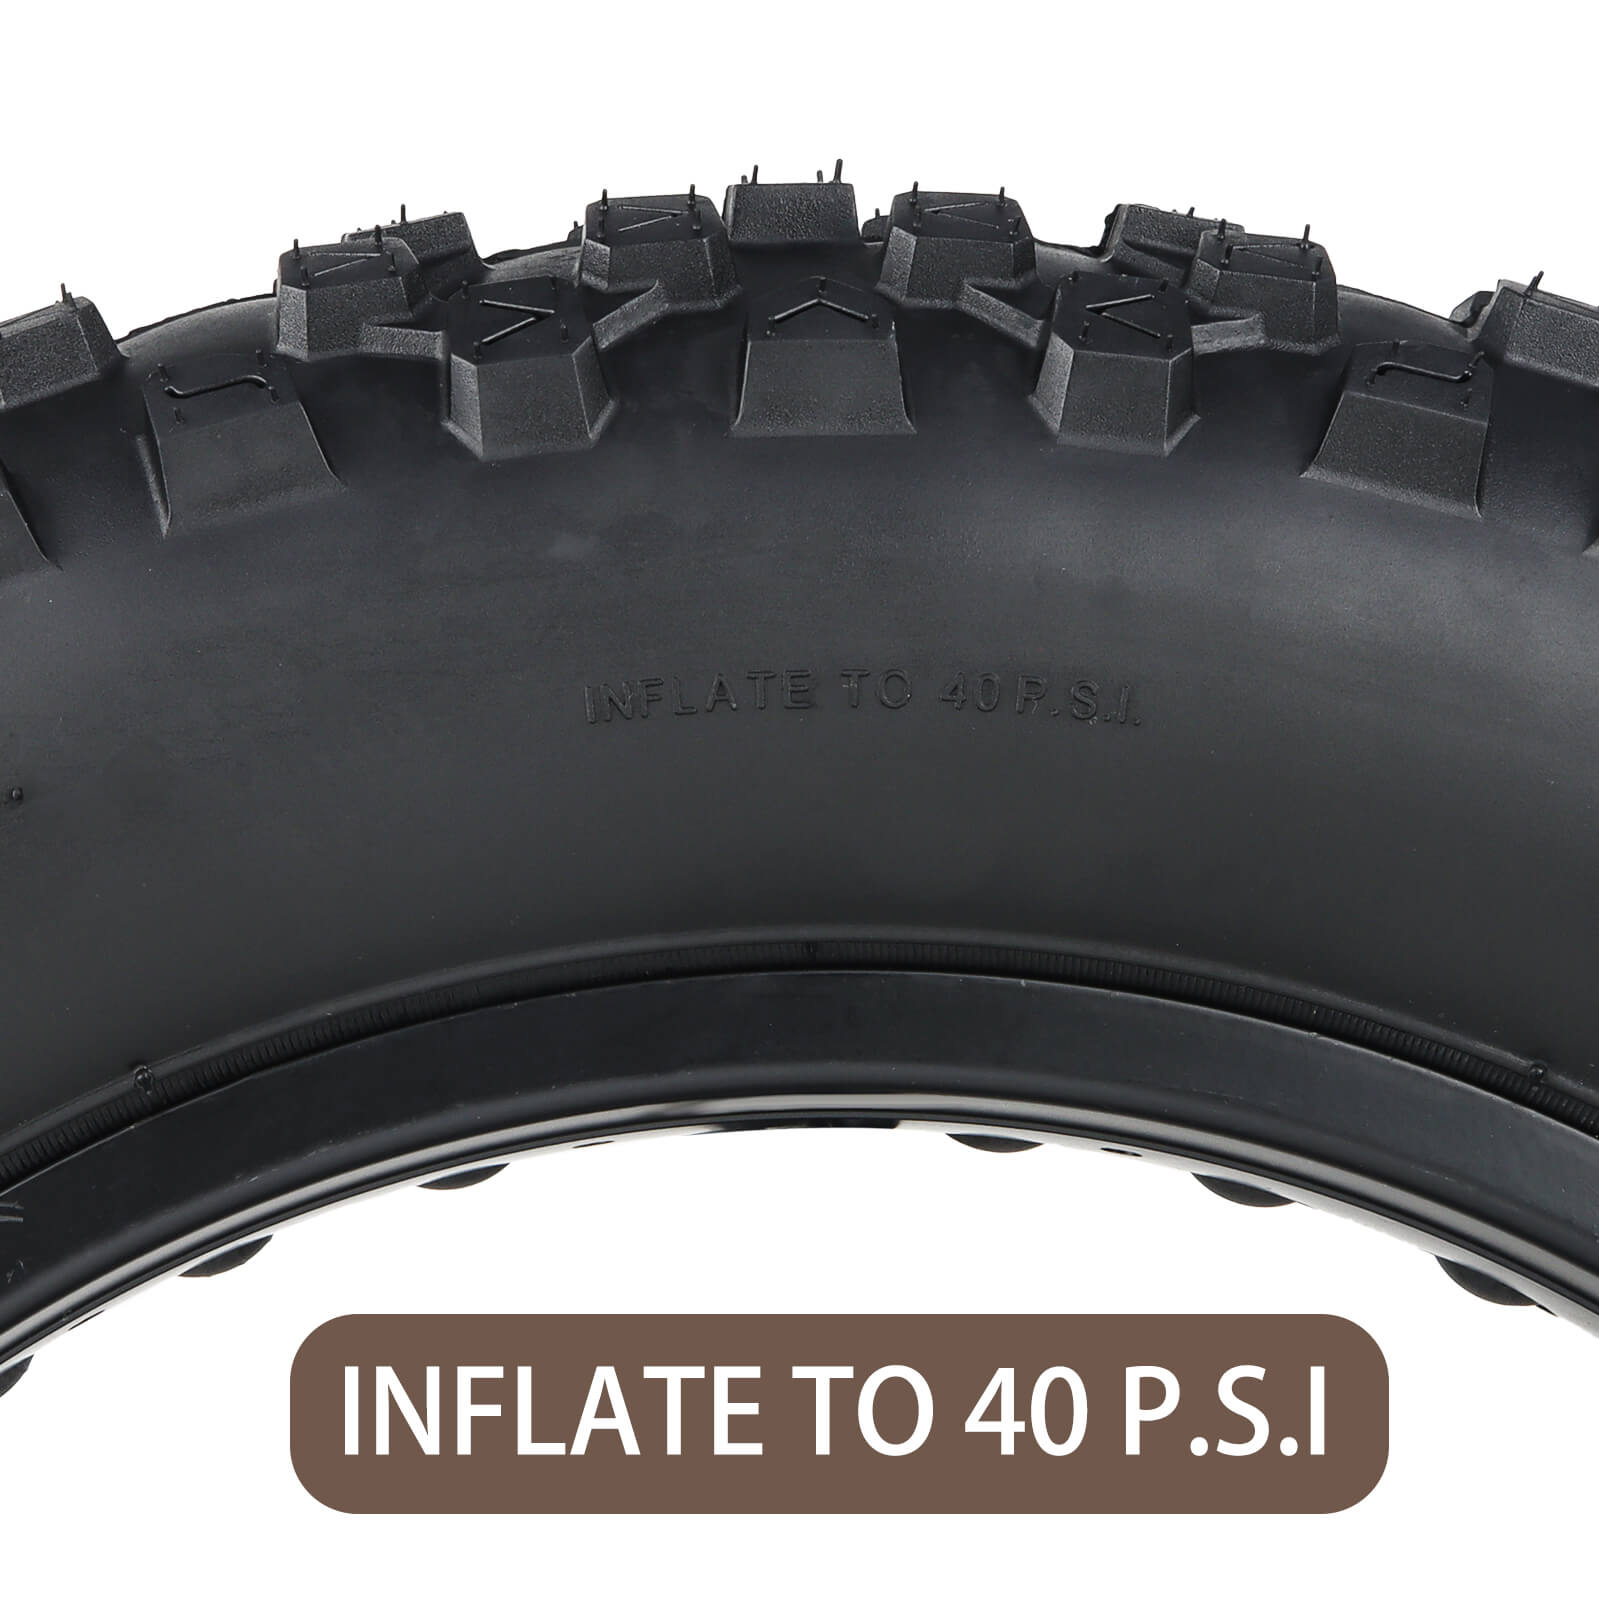 Hycline 20 "x4" studded knobs tread mountain fat bike tire suitable for challenging terrains: rocks, mud, and snow 40 PSI